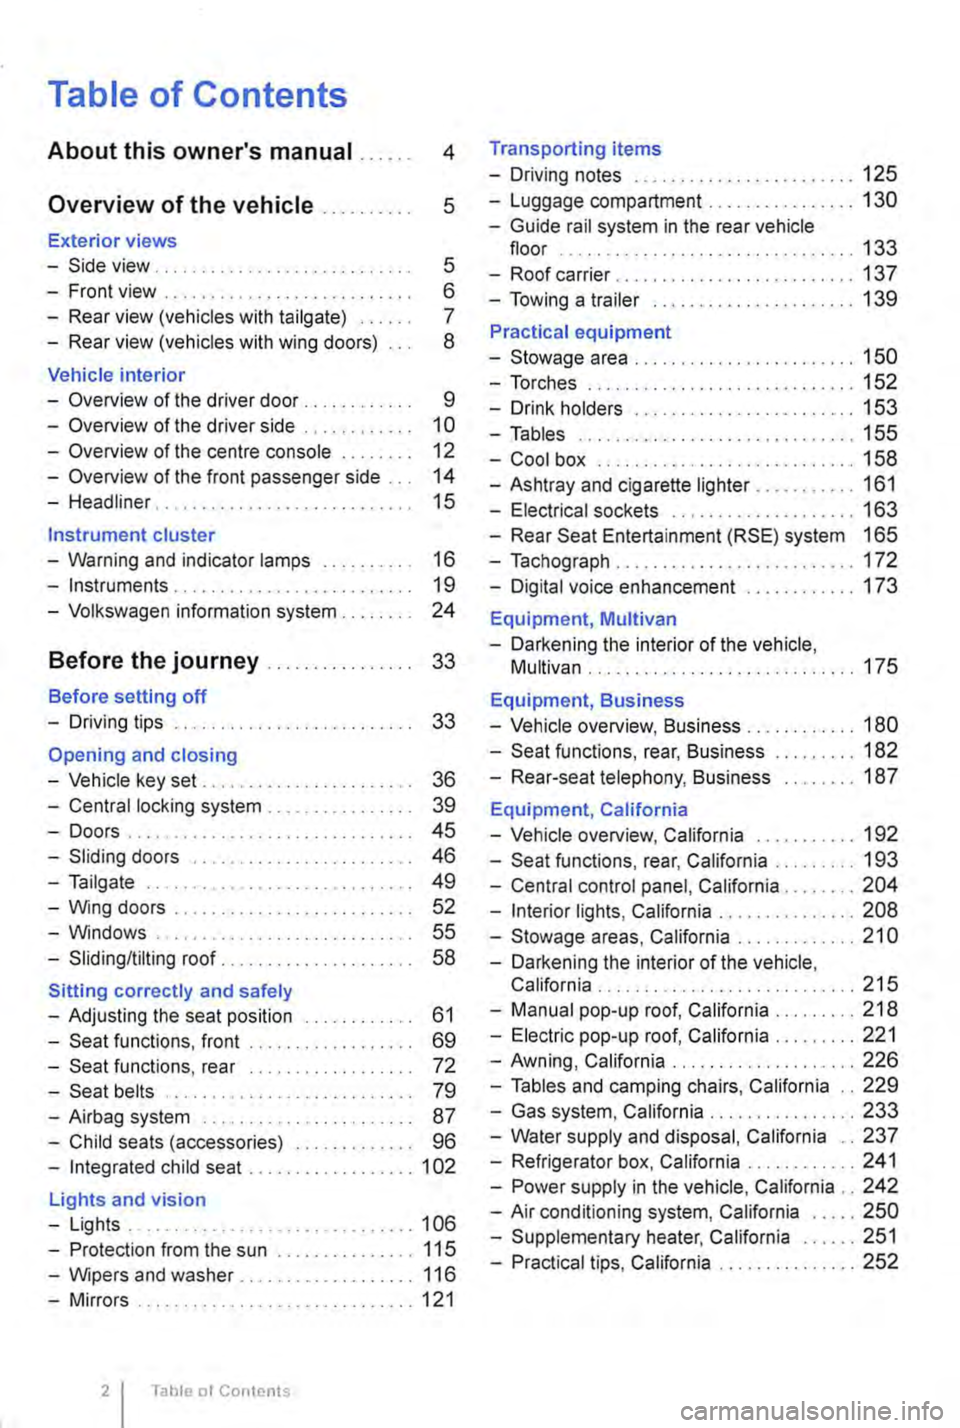 VOLKSWAGEN TRANSPORTER 2010  Owners Manual Table of Contents 
About this owners manual . . . . . . 4 
Overview of the vehicle . . . . . . . . . . 5 
Exterior views 
-Side view . . . . . . . . . . . . . . . . . . . . . . . . . . . . 5 
-Front 